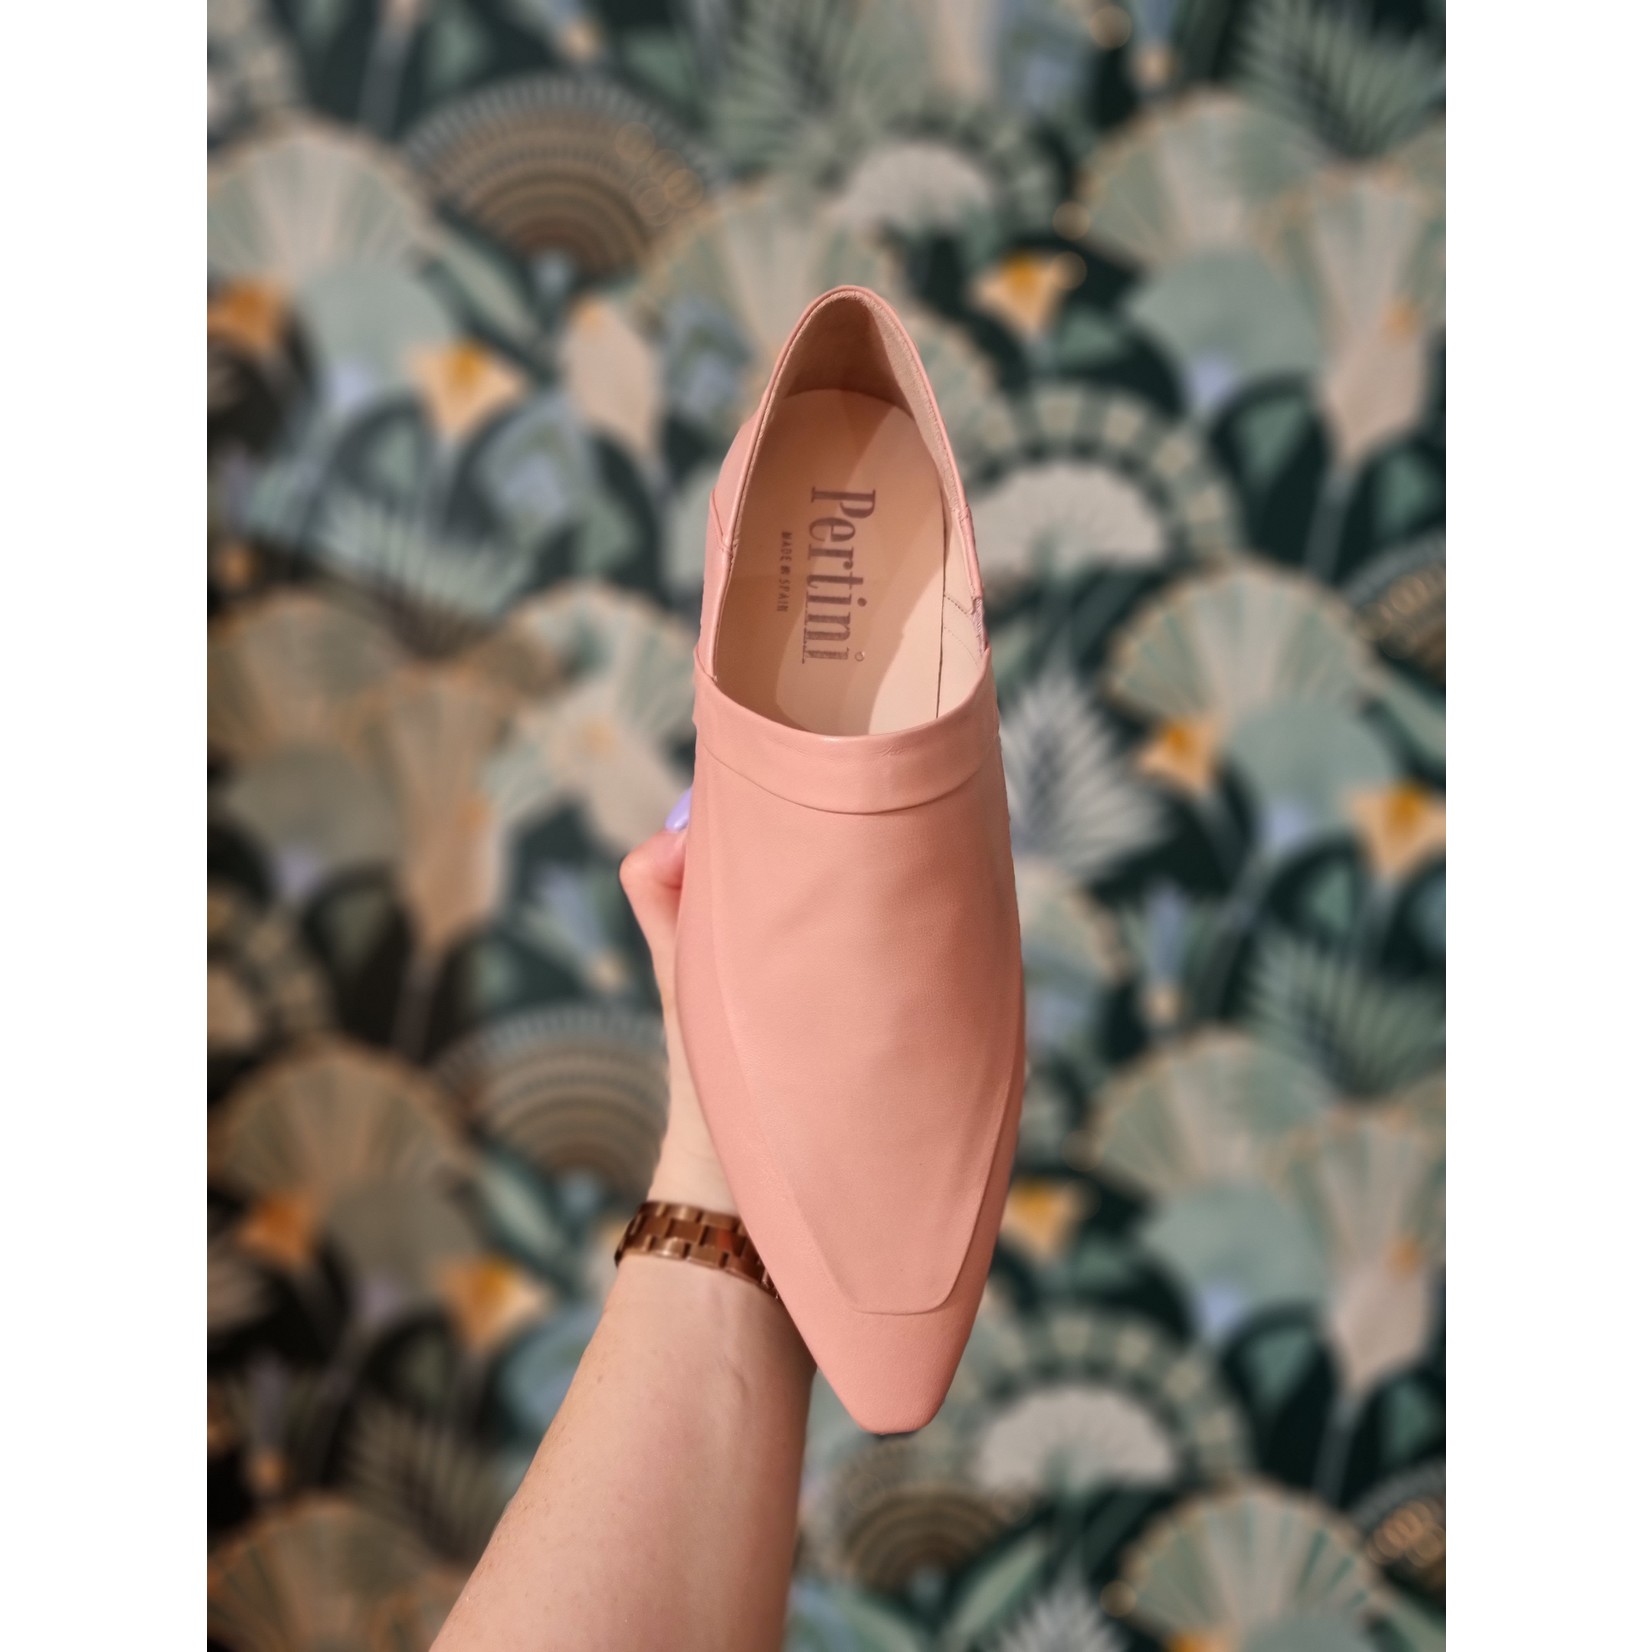 Pretty pink loafer